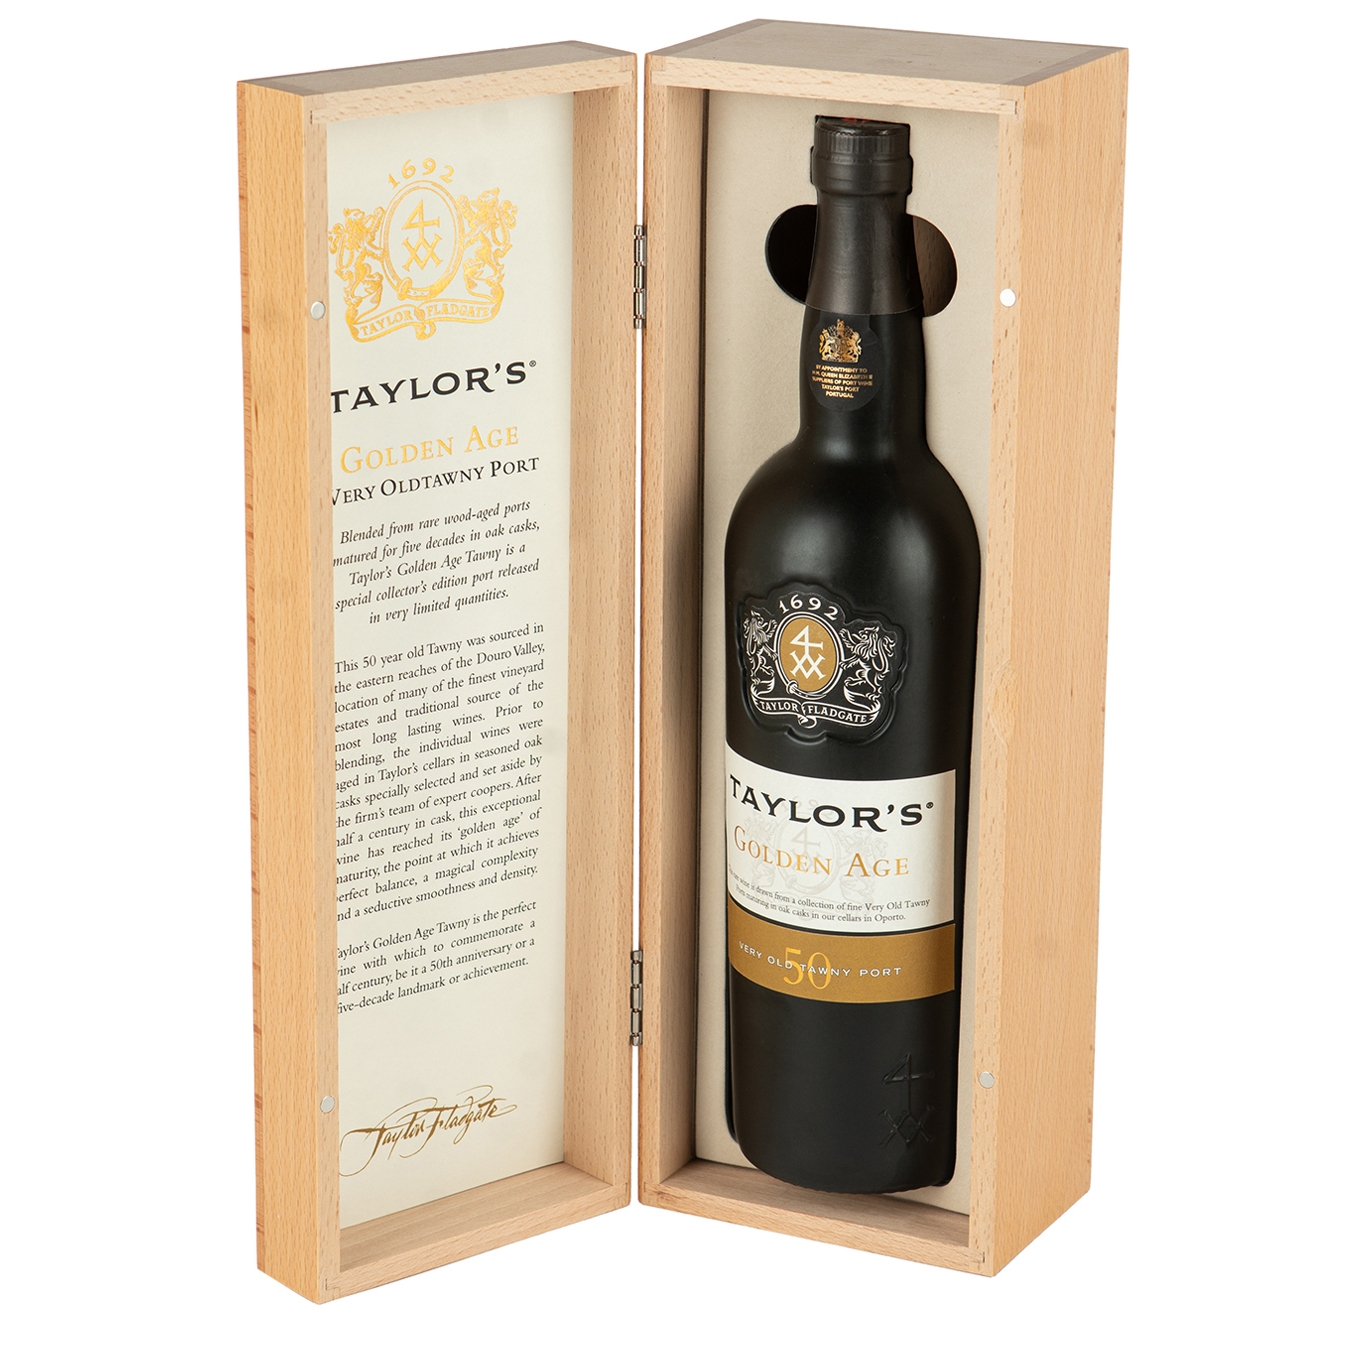 Taylor's Golden Age 50 Year Old Tawny Port Port And Fortified Wine